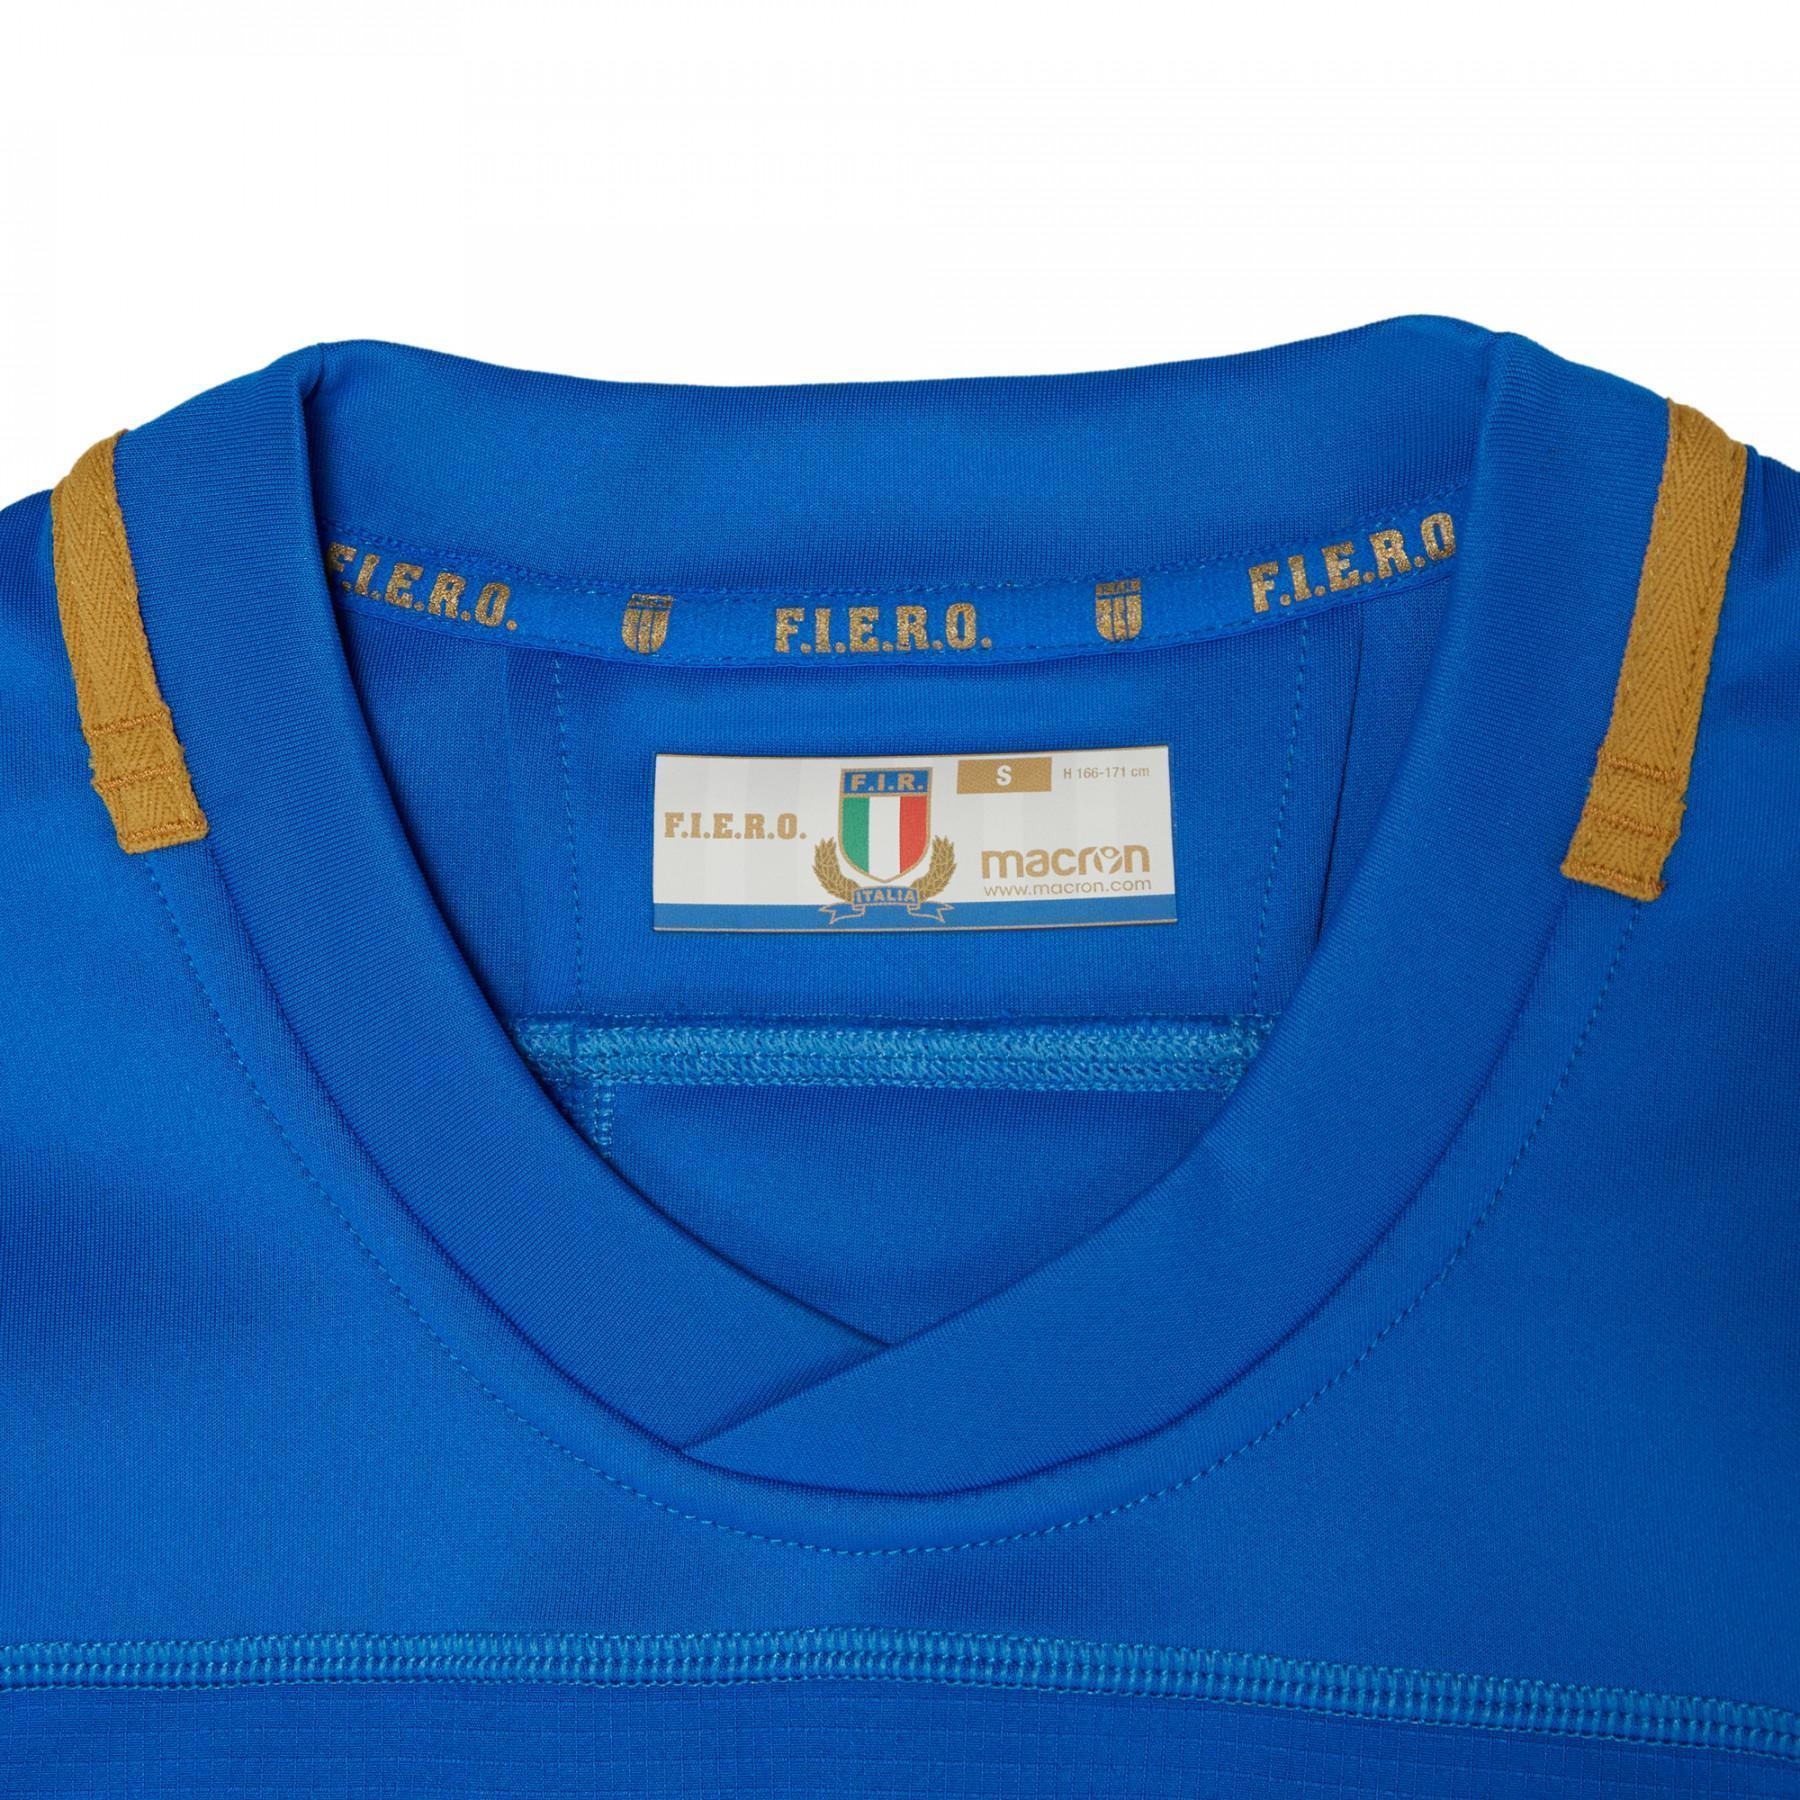 Authentic home jersey Italie Rugby 2017-2018